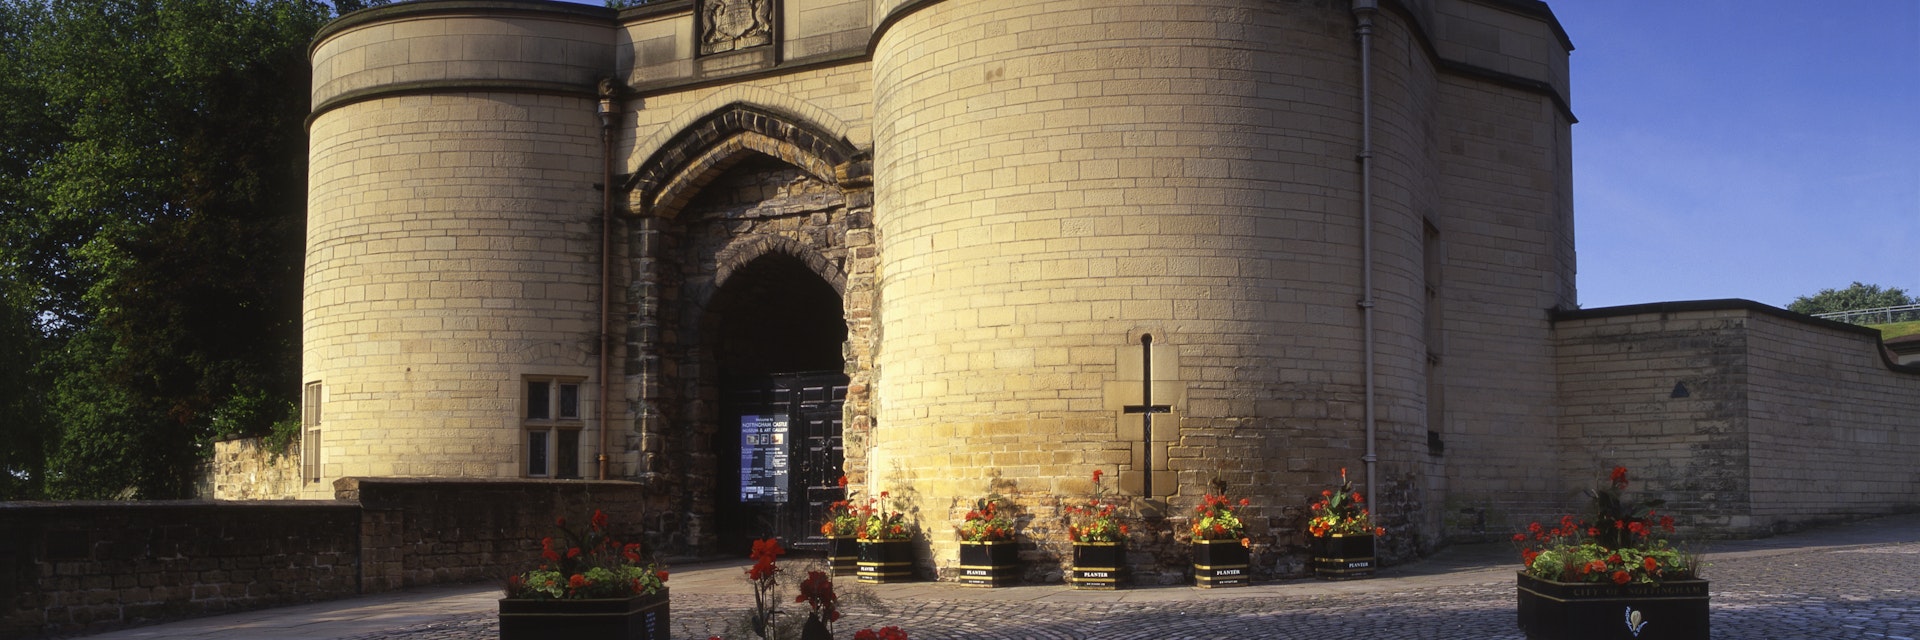 Nottingham Castle Gatehouse, the entrance for visitors and tourists visiting the castle in Nottinghamshire.